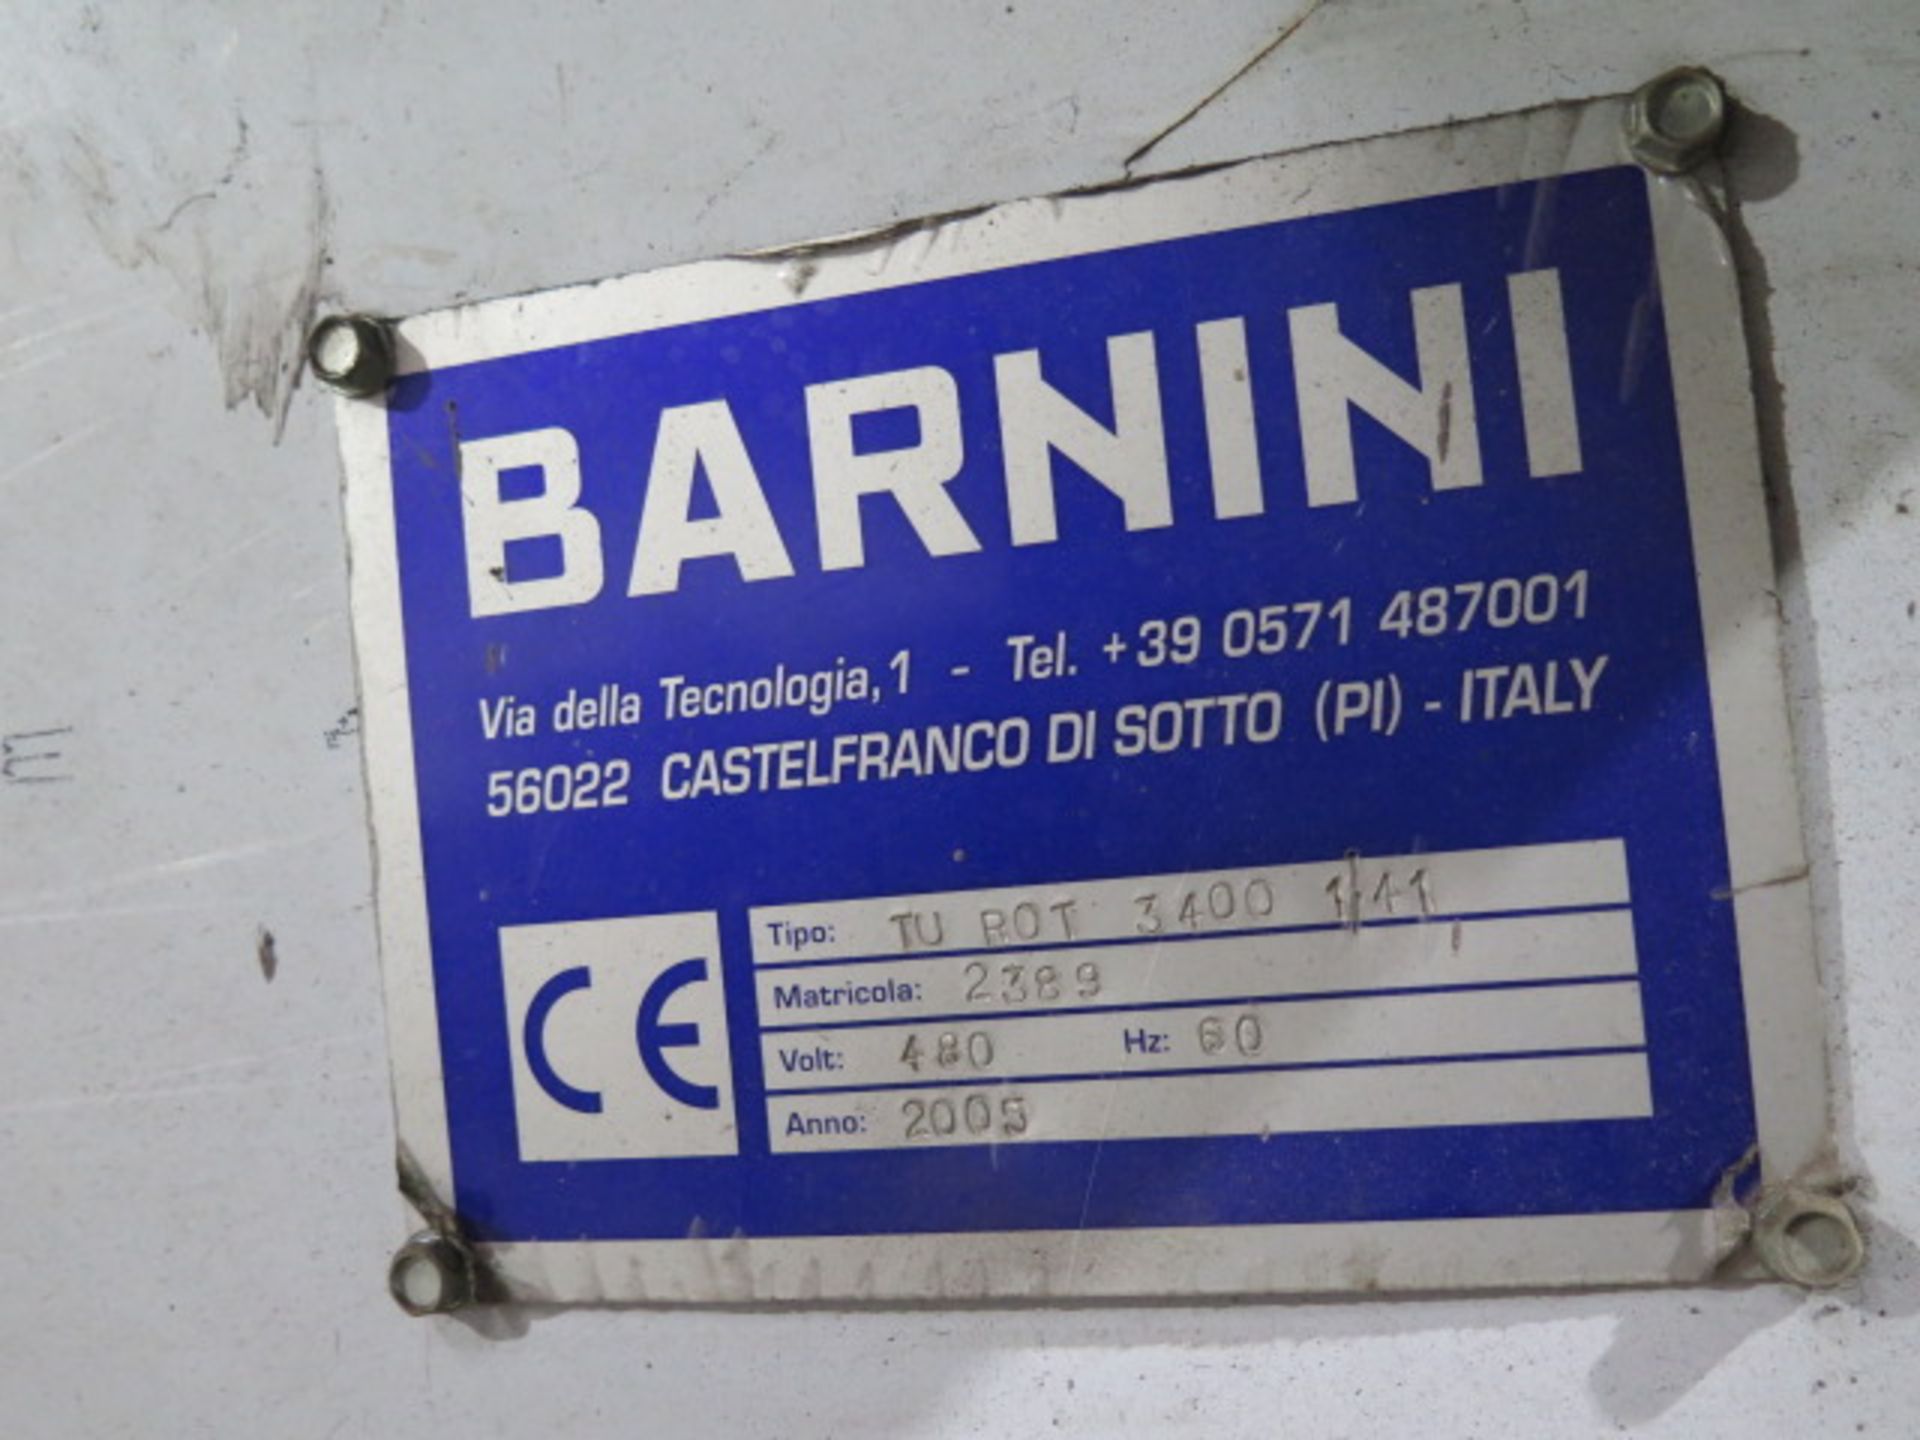 2005 Barnini Type TU ROT-2C-B3-TG-R Spray Coating(Two Units – Inline) w/GER Spray Control,SOLD AS IS - Image 40 of 40